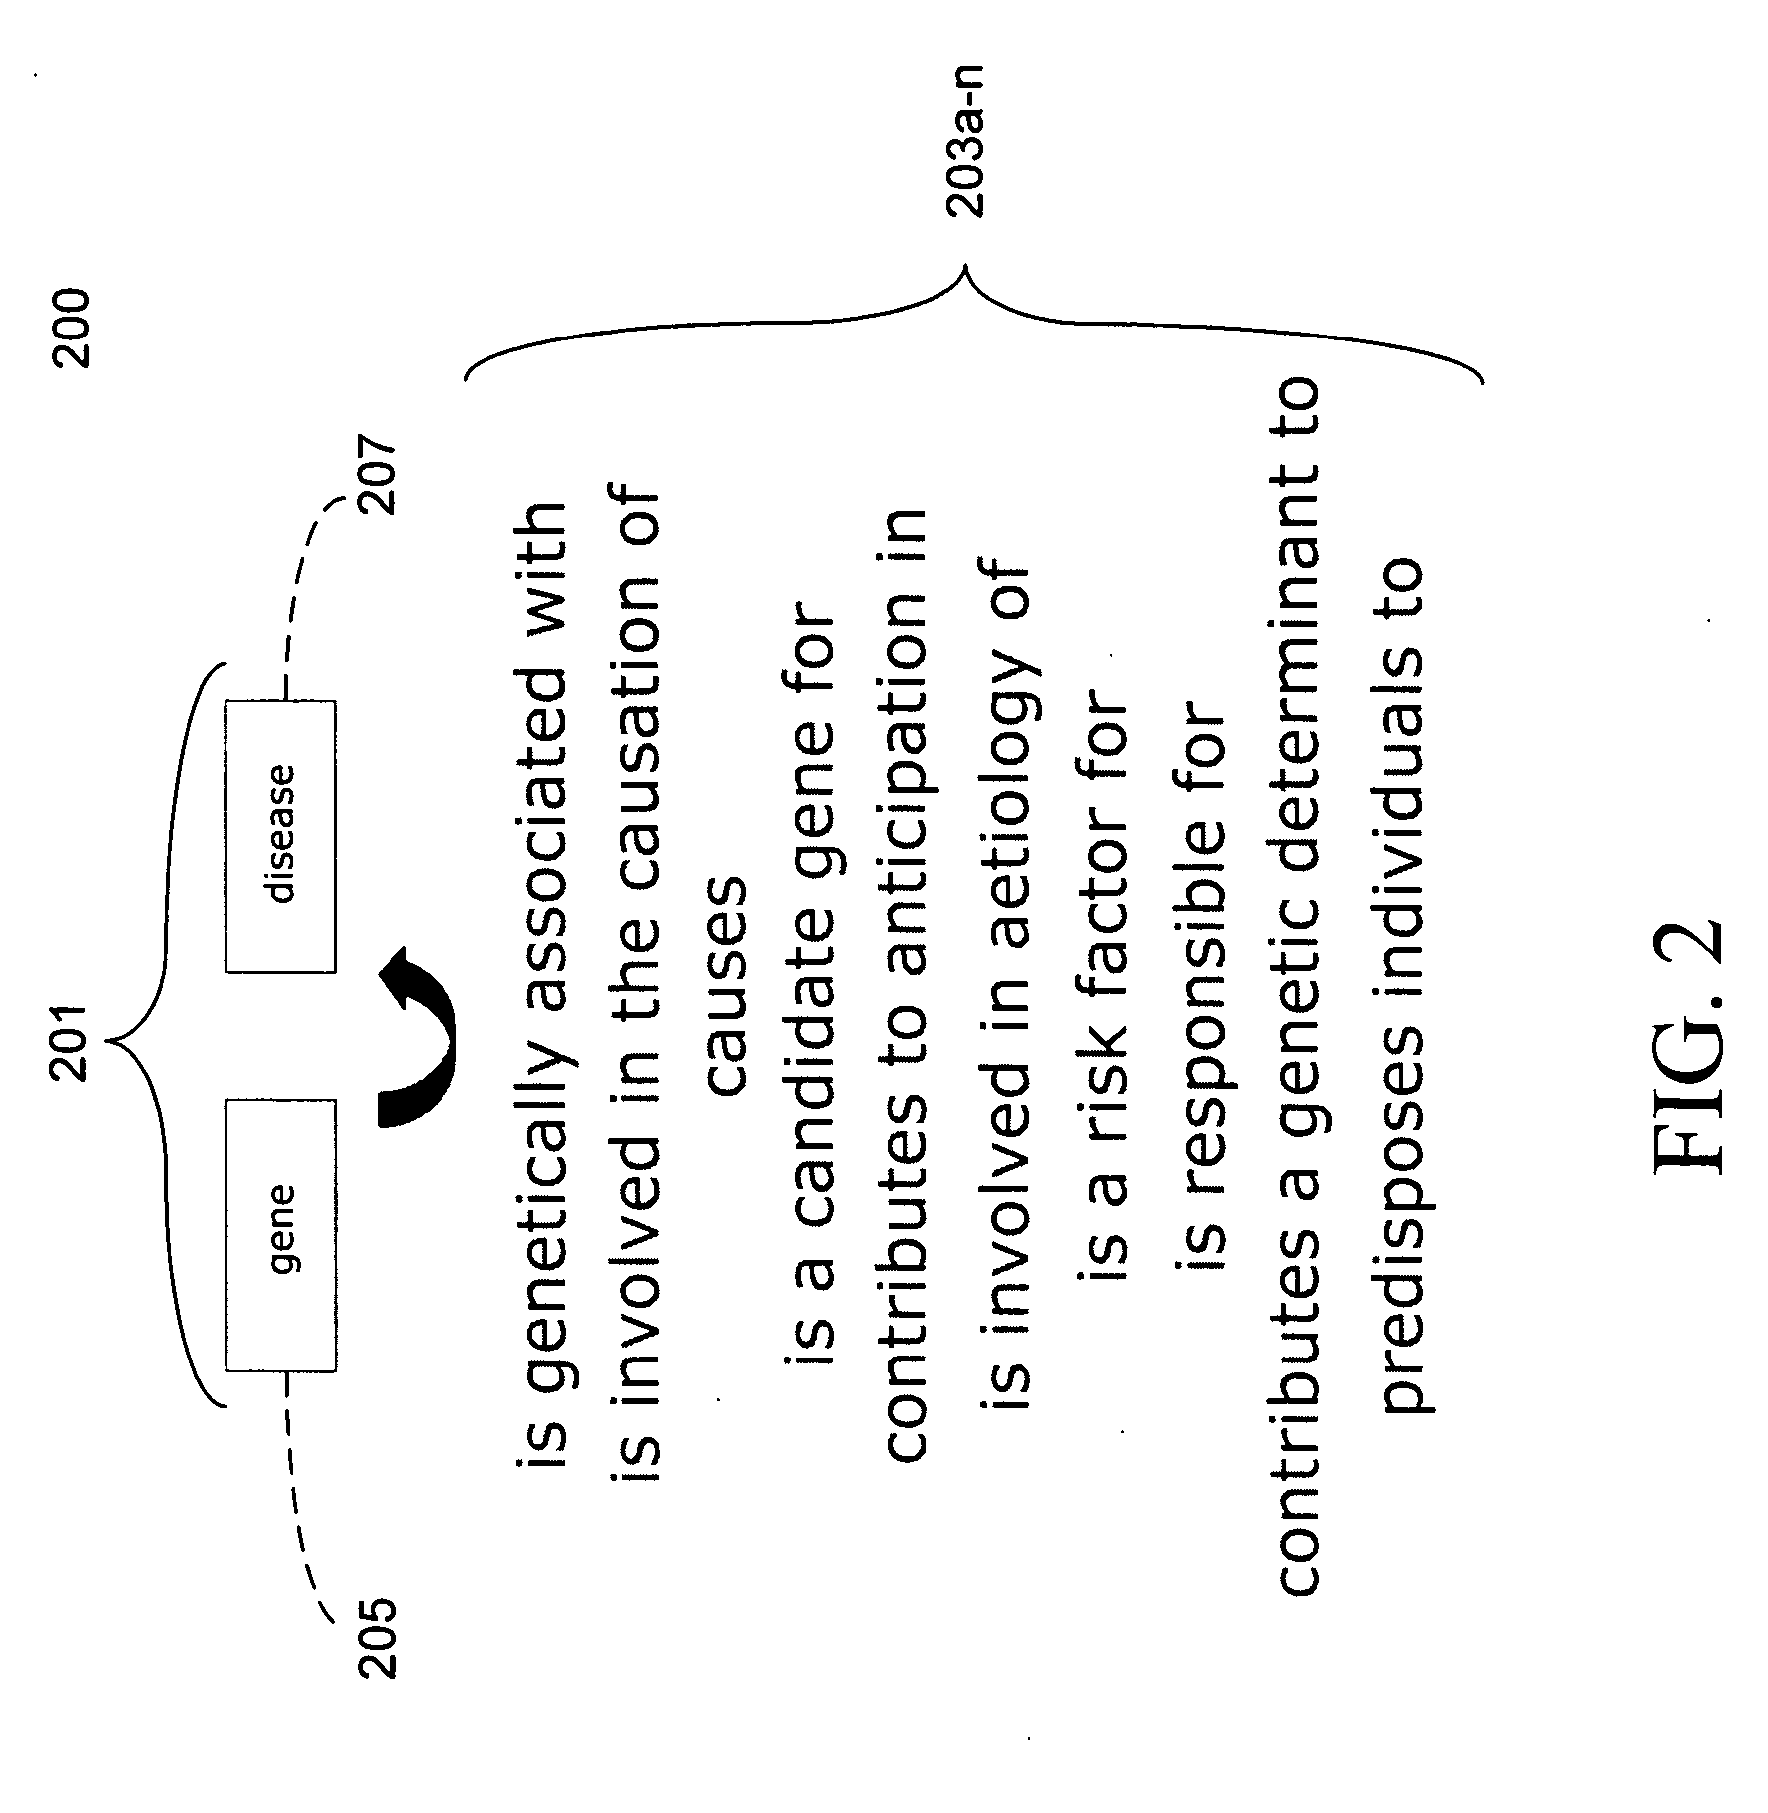 System and method for graphically displaying ontology data